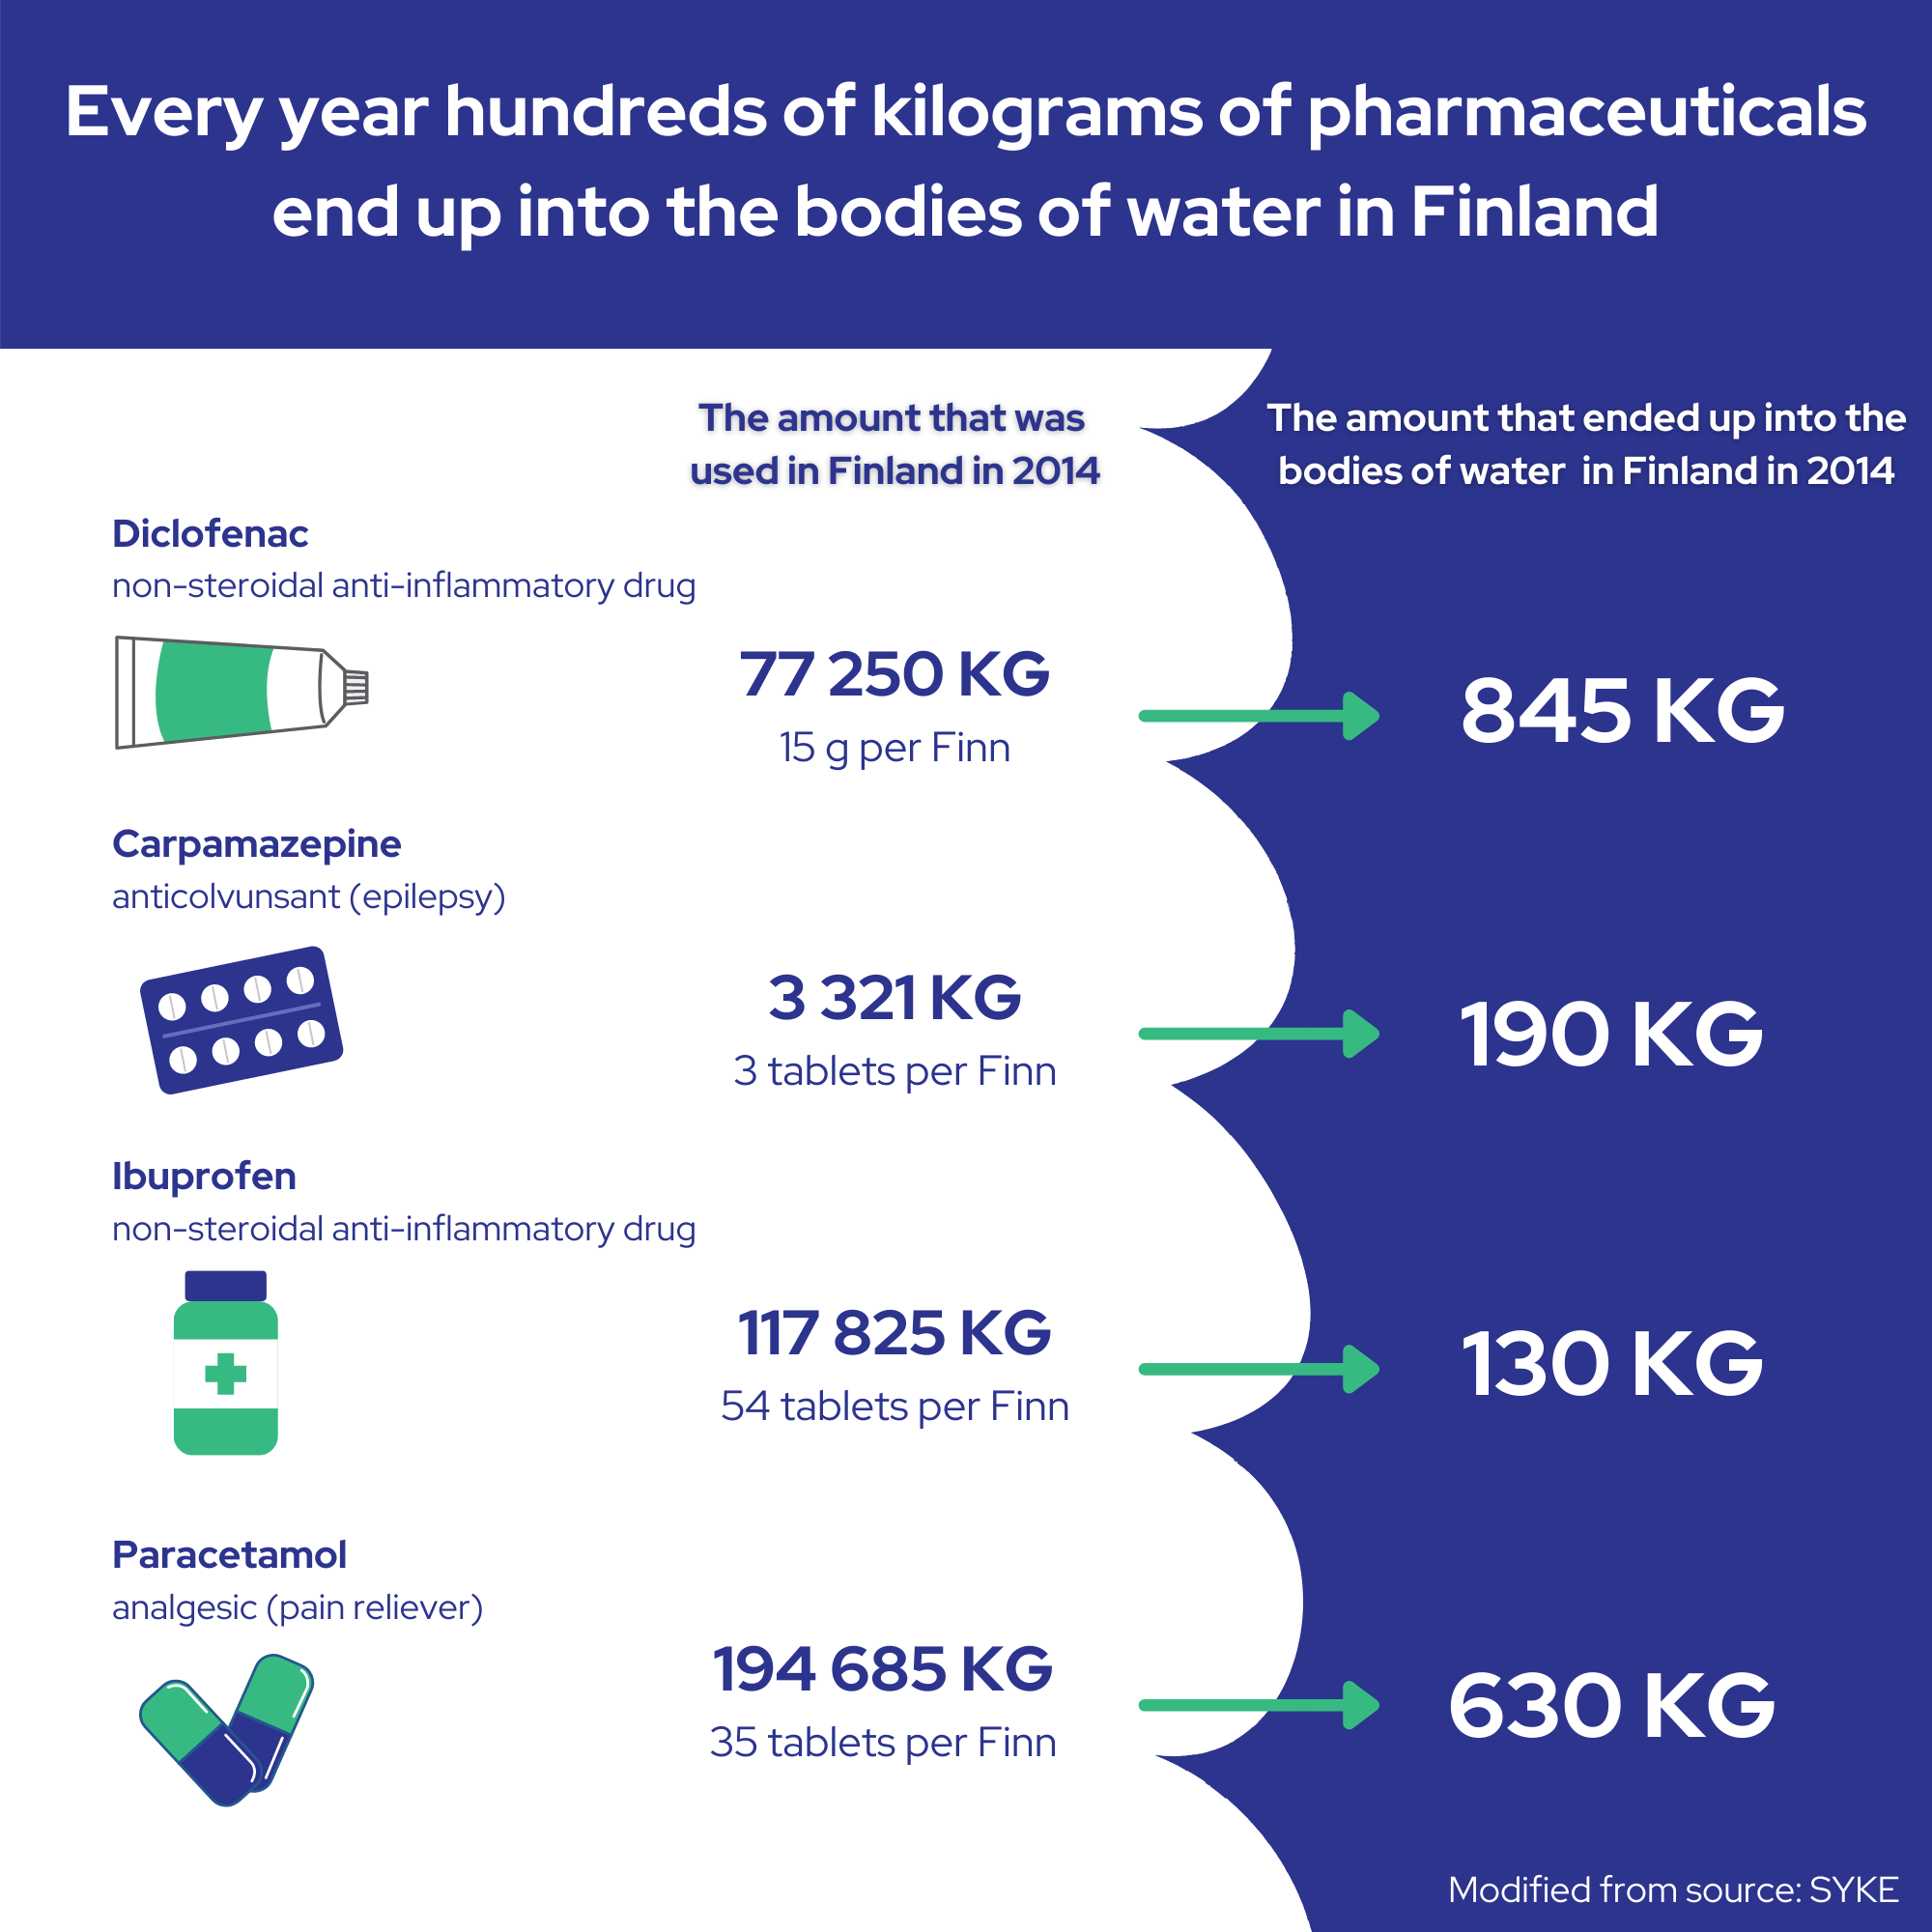 Every year hundreds of kilograms of pharmaceuticals end up in bodies of water in Finland. In the picture, there is diclofenac, carbamazepine, ibuprofen and paracetamol. 77 250 kg of diclofenac was used in Finland in 2014 and 845 kg of it ended up in bodies of water. For carbamazepine, numbers were 3 321 kg and 190 kg, in the case of ibuprofen 117 825 kg and 130 kg and for paracetamol 194 685 kg and 630 kg, accordingly.